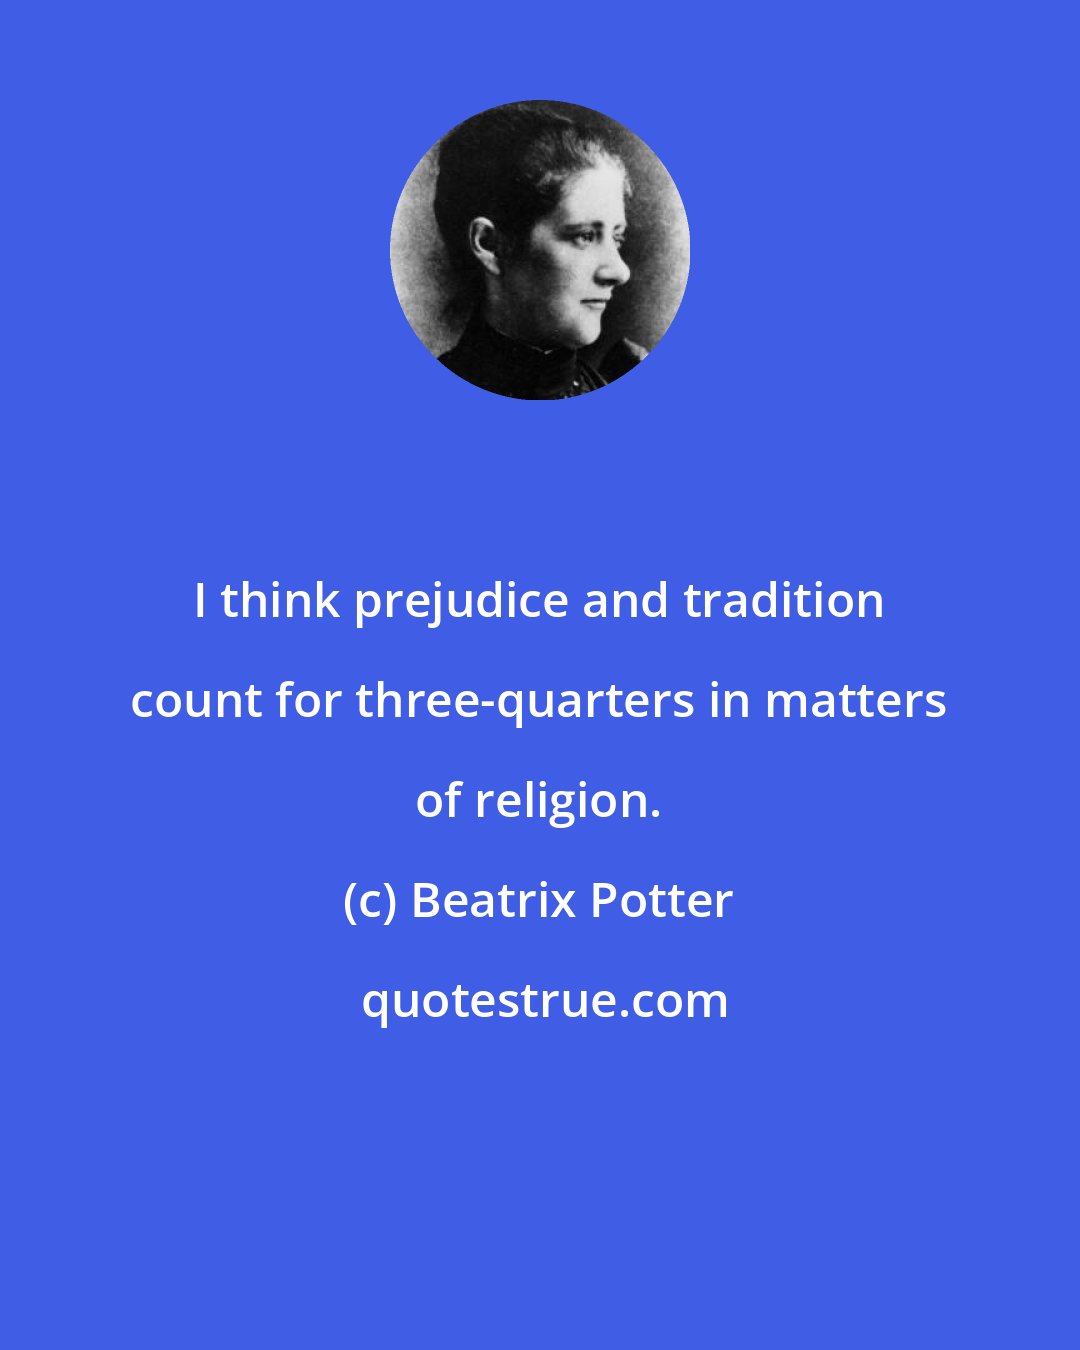 Beatrix Potter: I think prejudice and tradition count for three-quarters in matters of religion.